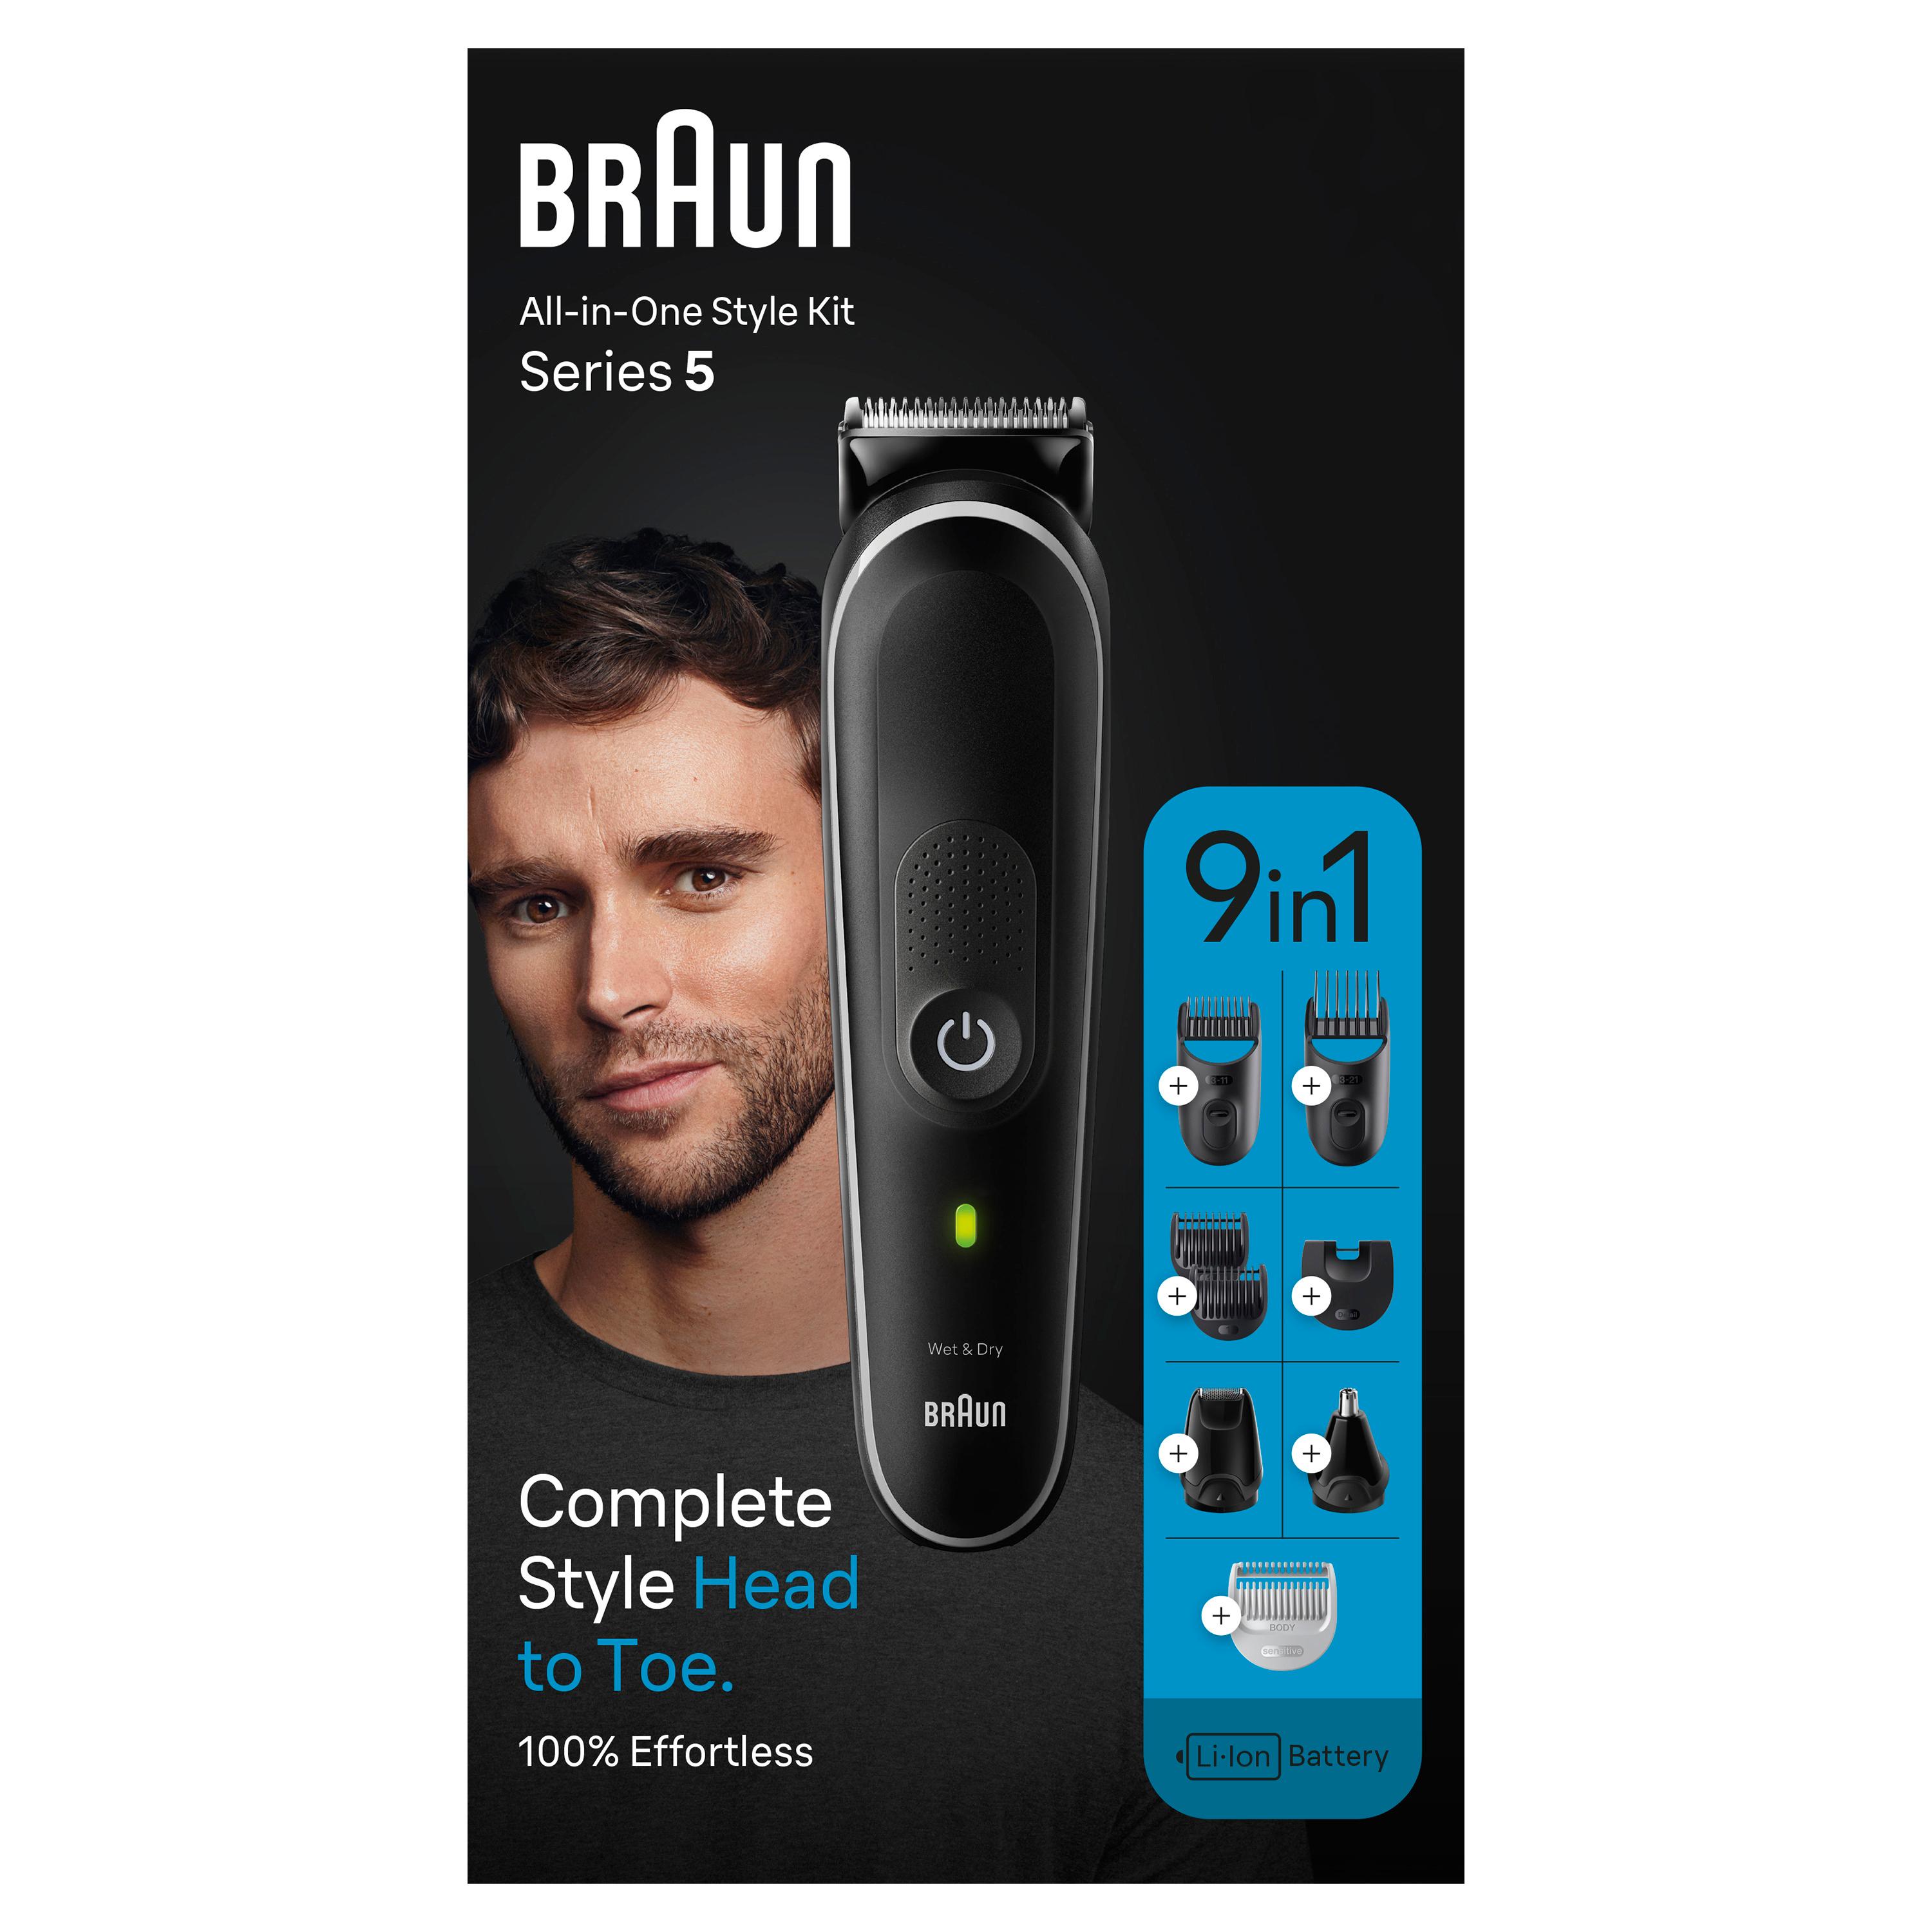 BRAUN - All-in-One Style Kit MGK5410